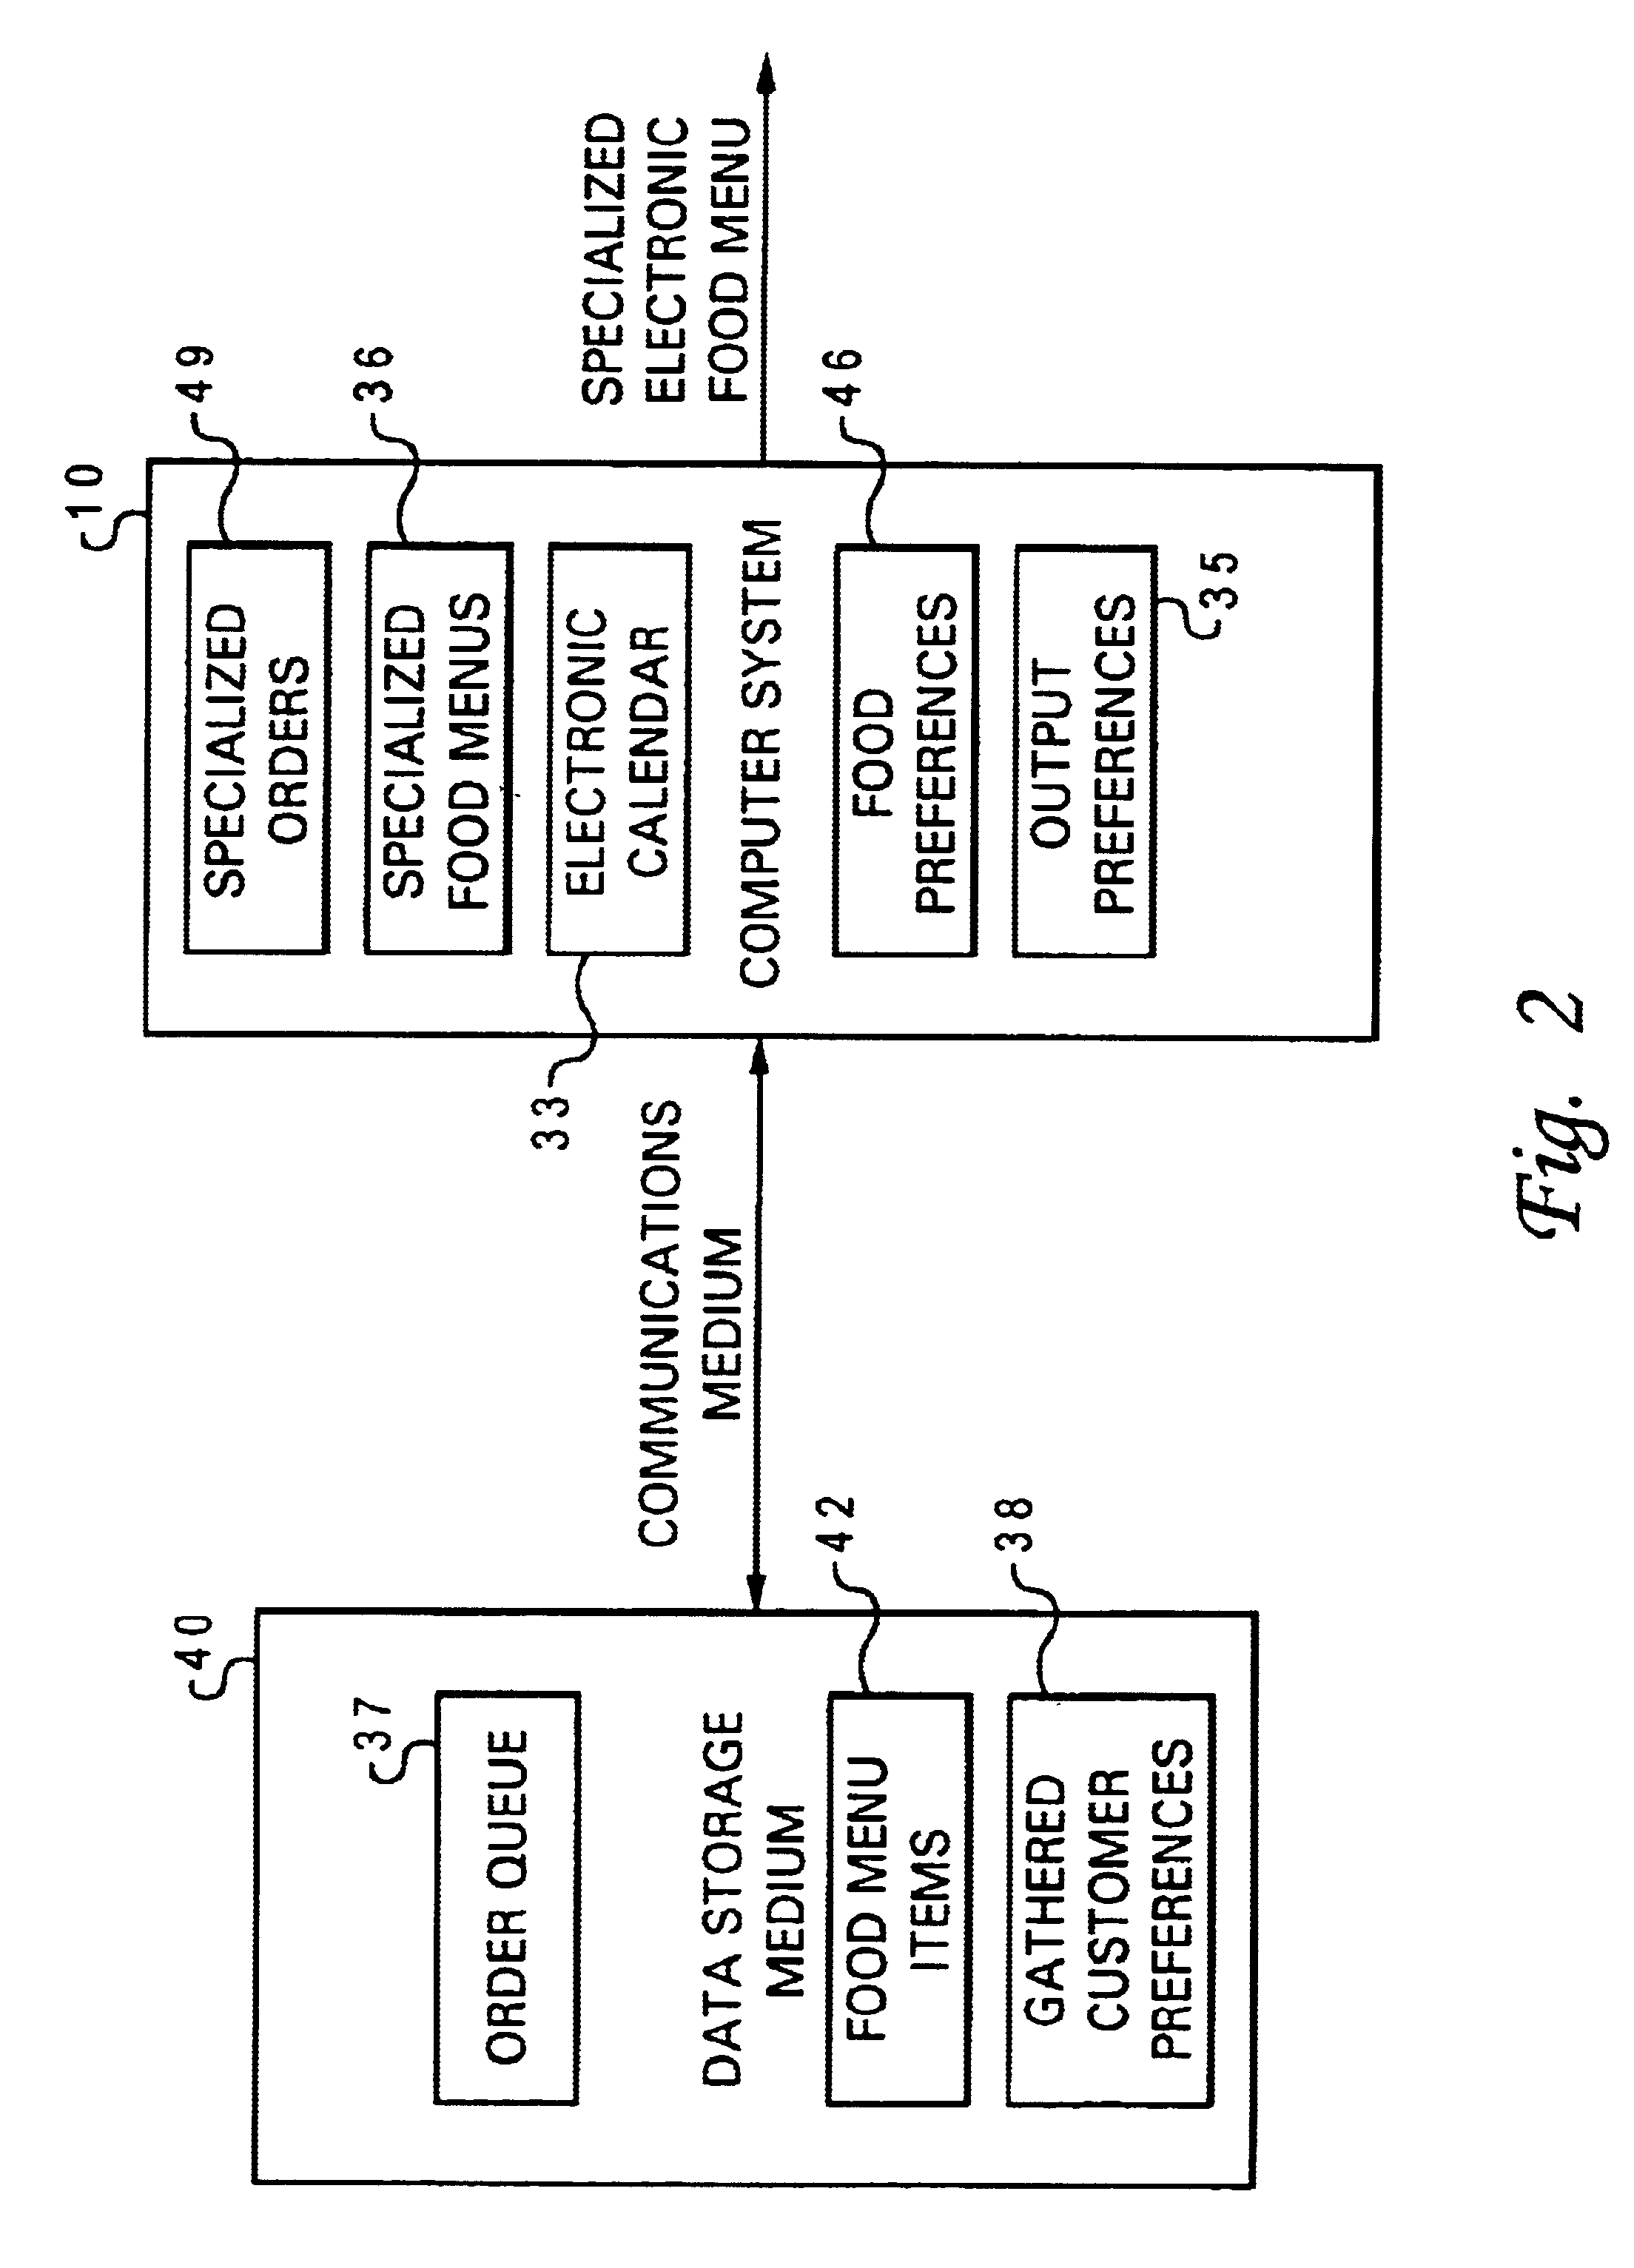 Method, system and program for specifying an electronic food menu on a data processing system